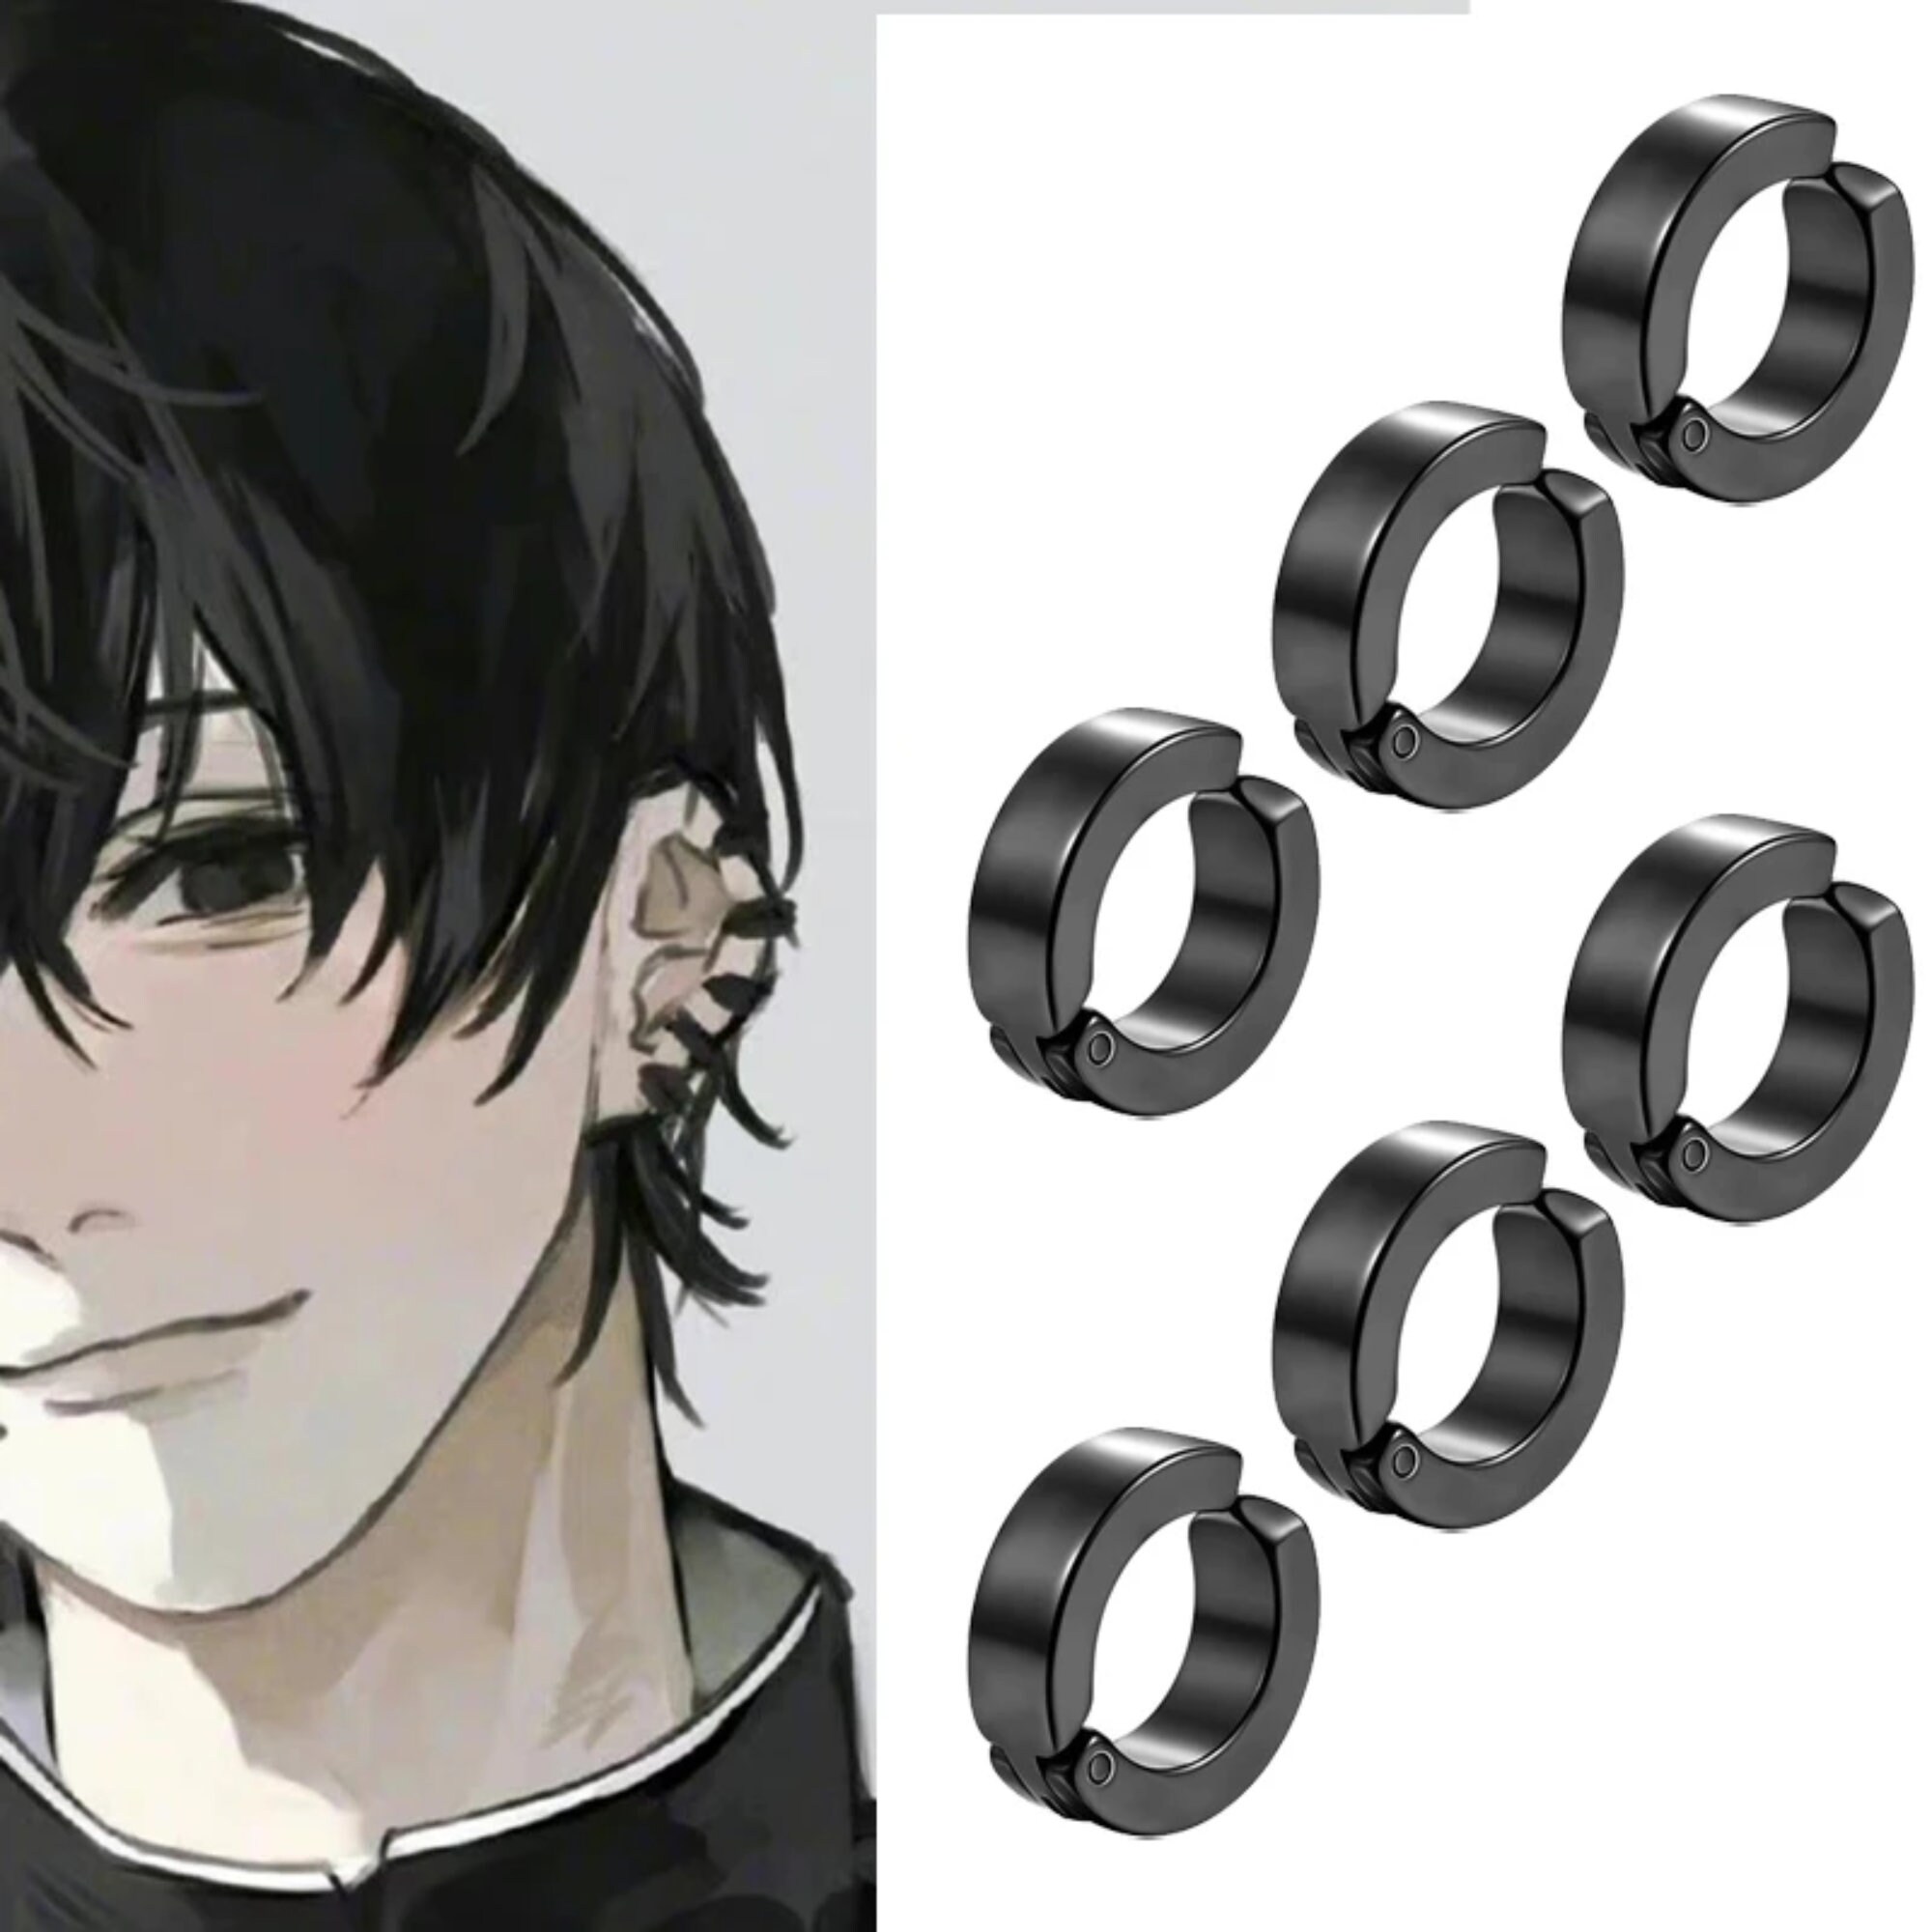 17 Of The Best Anime Characters With Piercings